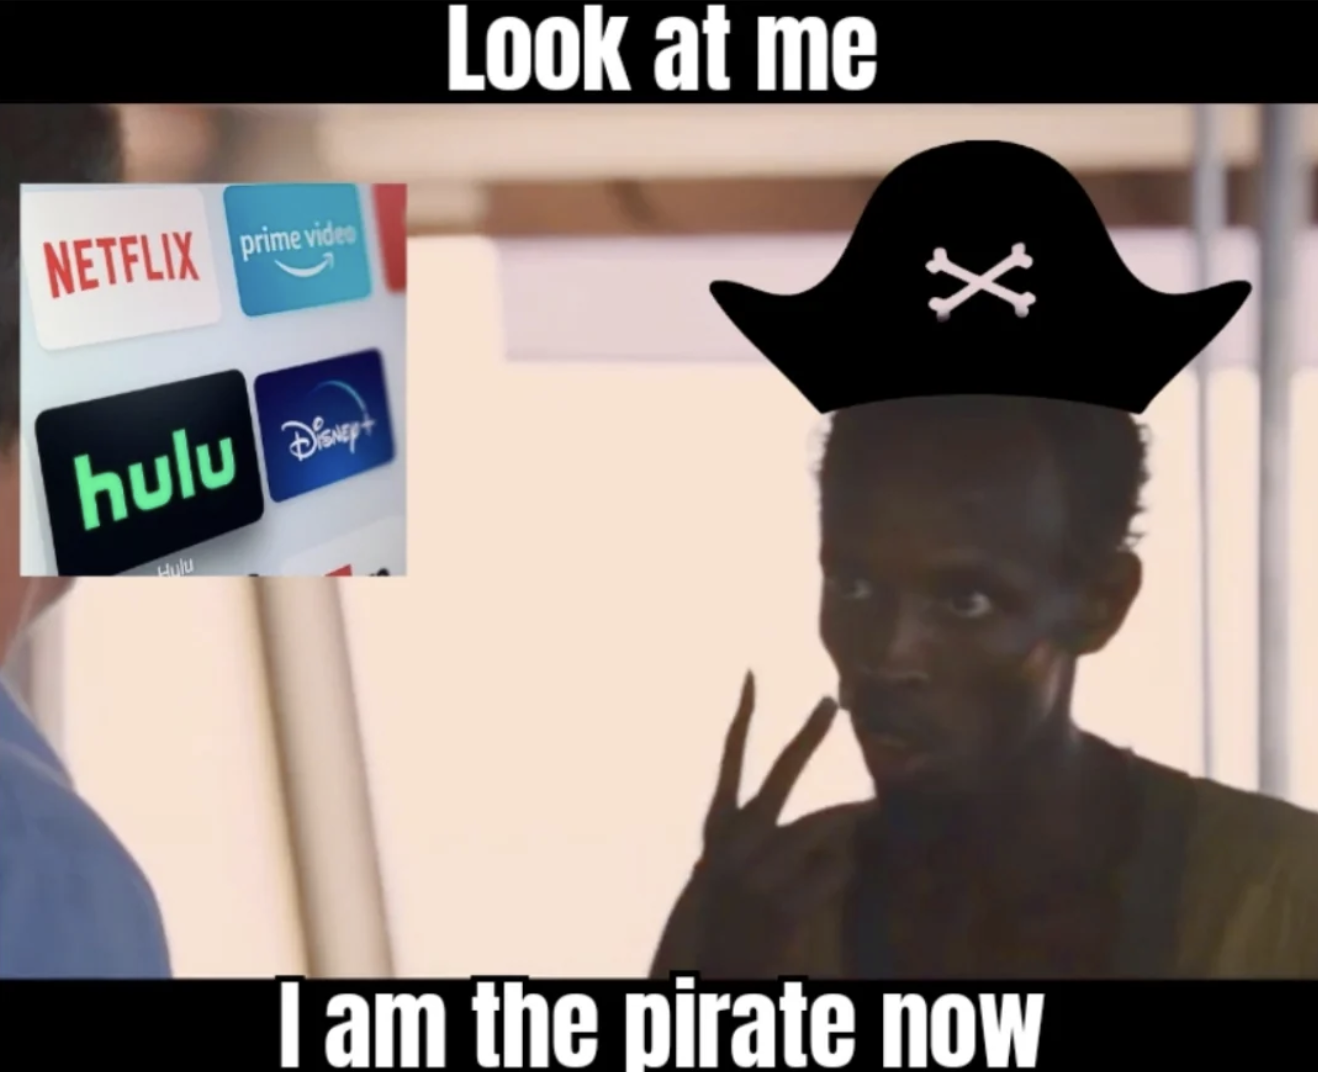 photo caption - Netflix prime vide hulu Disney Look at me I am the pirate now